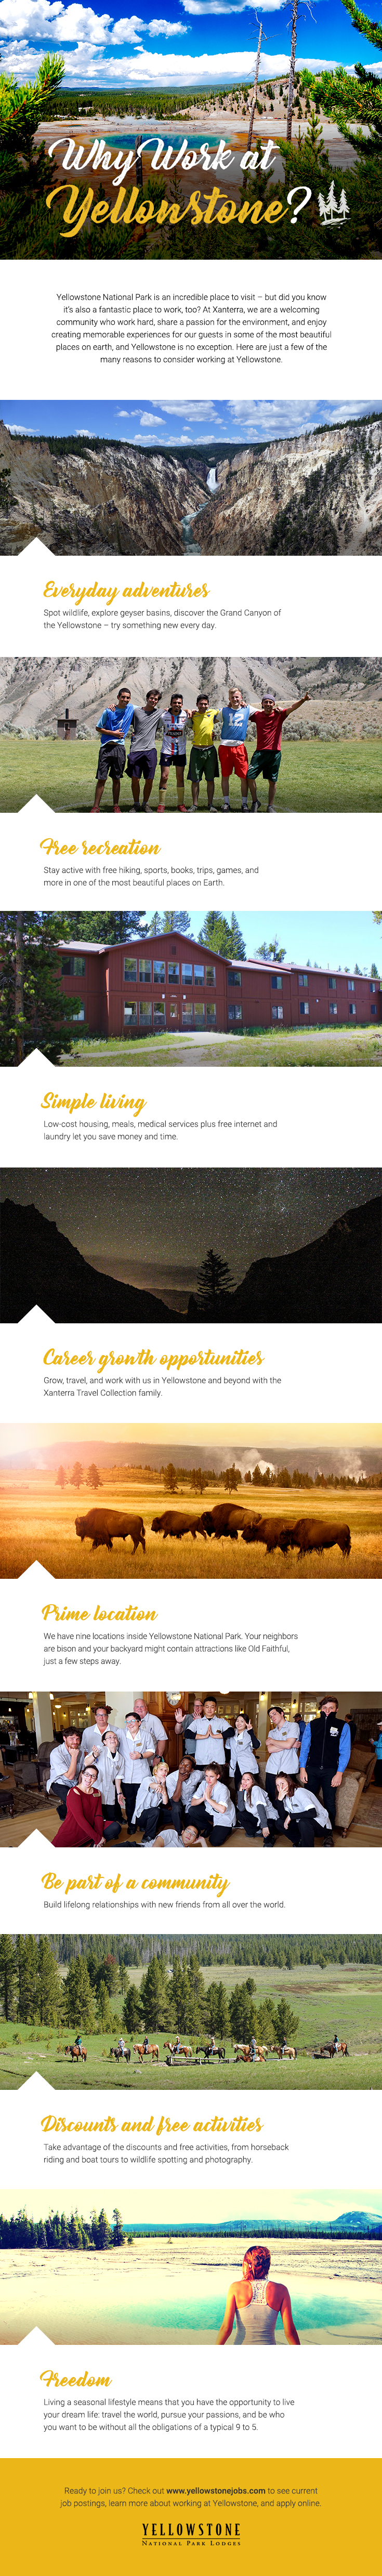 Reasons to Work in Yellowstone [Infographic]